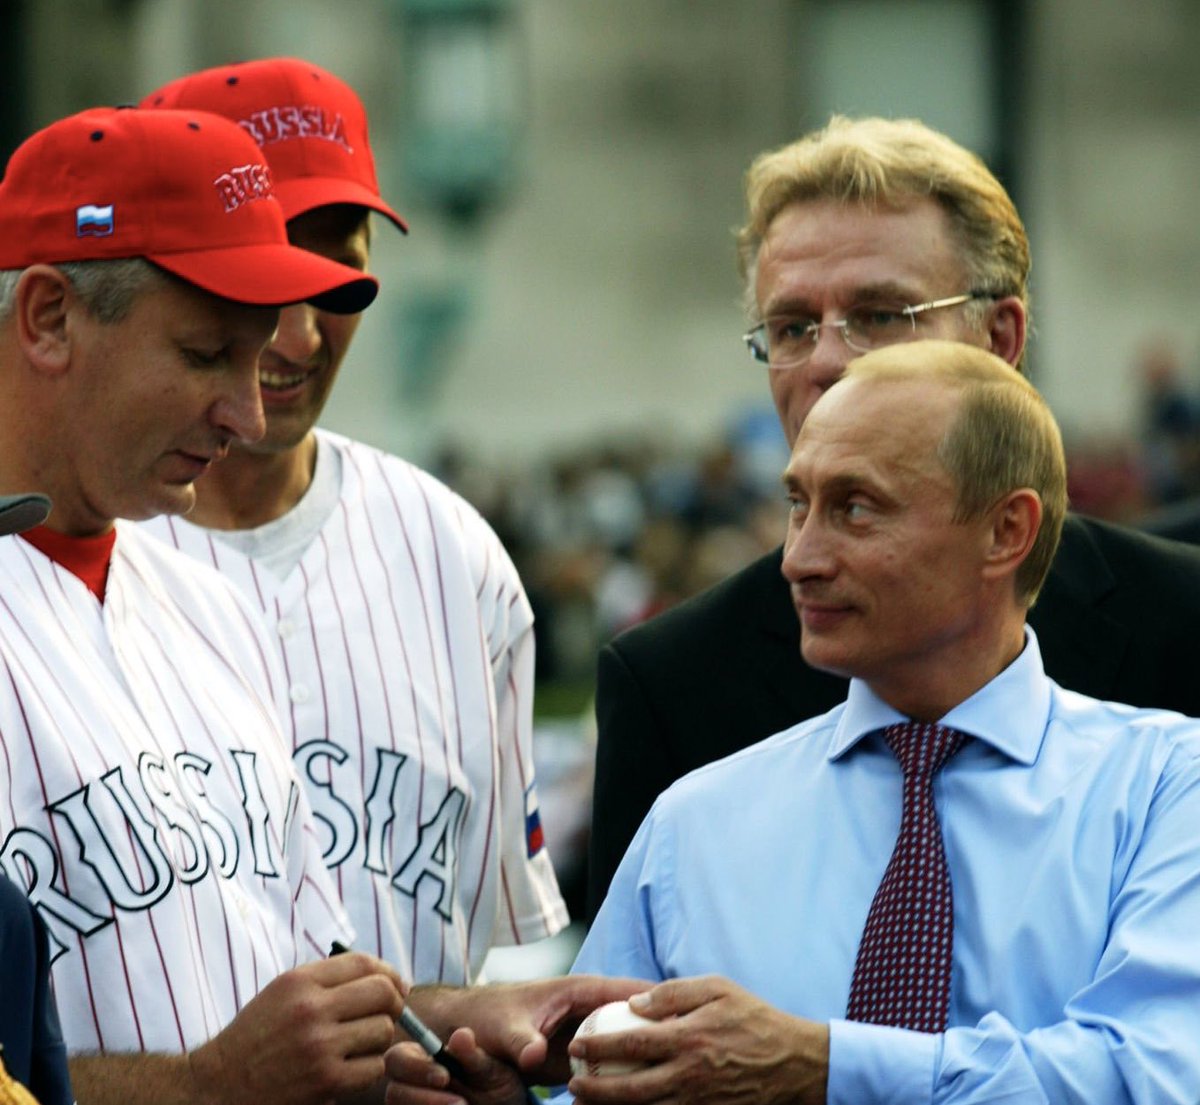 Vladimir Putin invites MLB players to Russia Freedom Baseball League, sources say:

“Putin is willing to pay top dollars for talent,” one league official is saying. “Gerrit Cole and Shohei Ohtani could make triple what the Yankees and Angels are giving them.” https://t.co/Xe9wVL2yxf